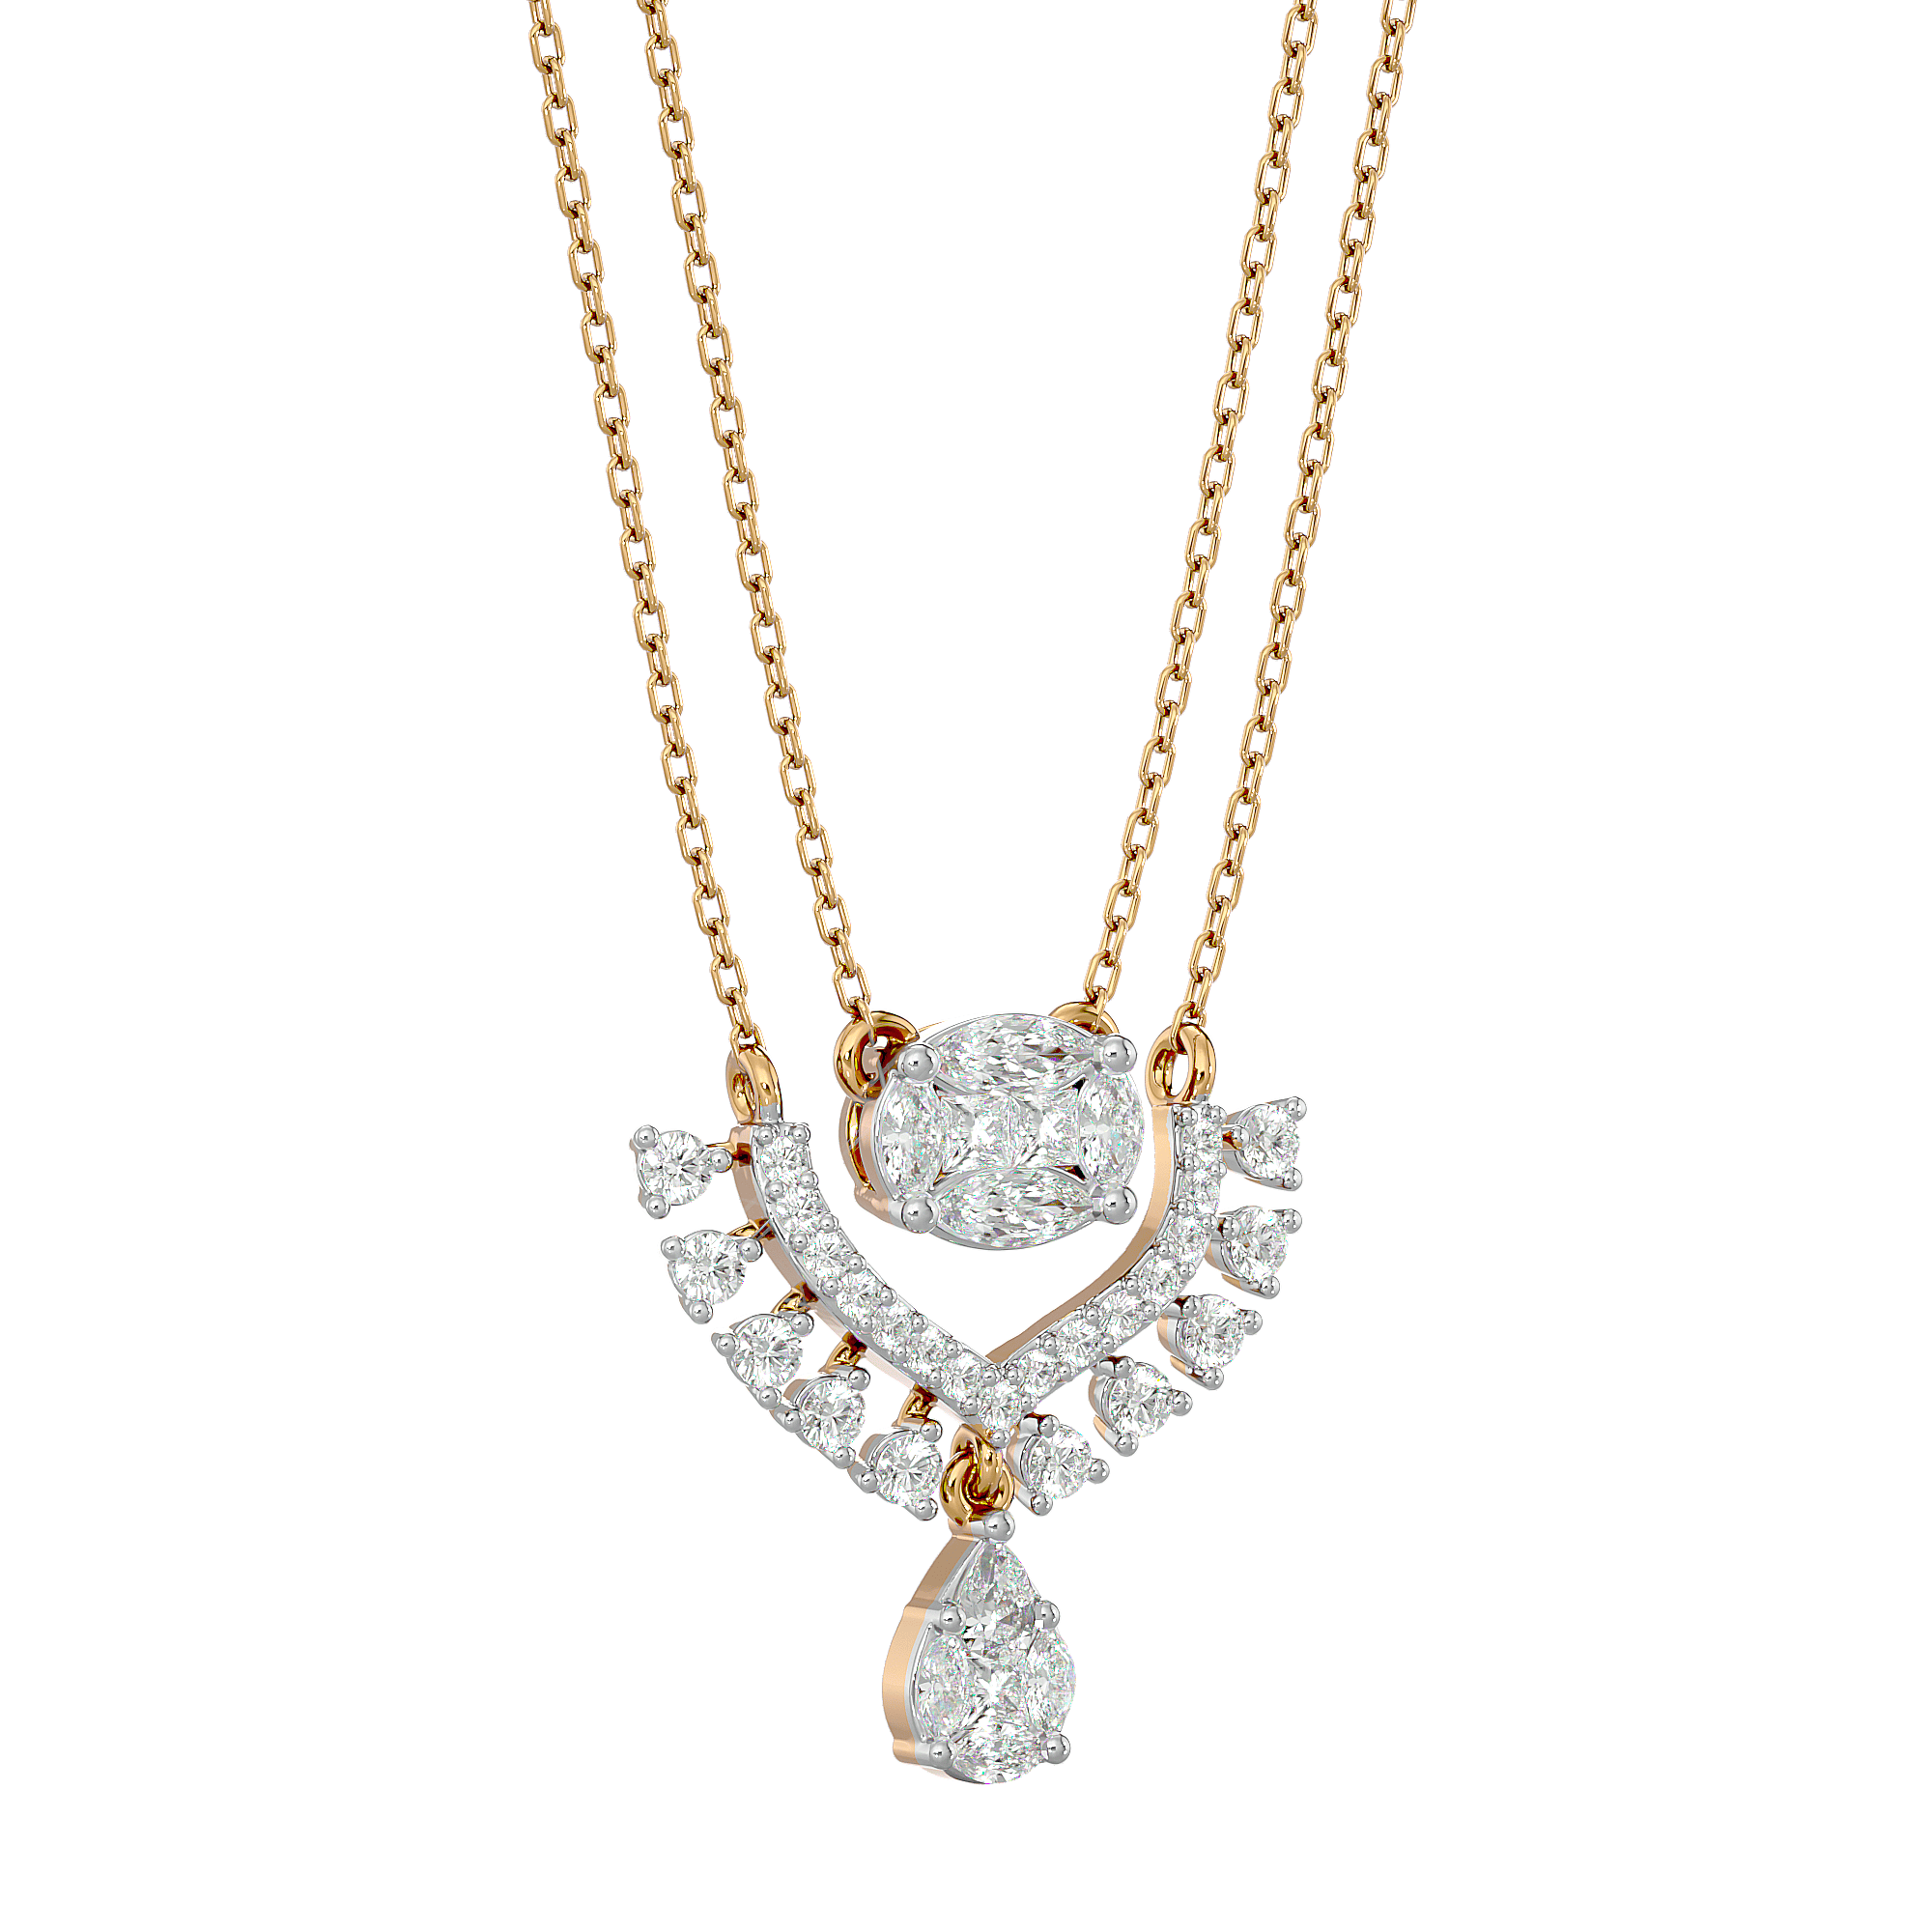 Blooming-Sol-Diamond-Pendant-PD2924A-View-01